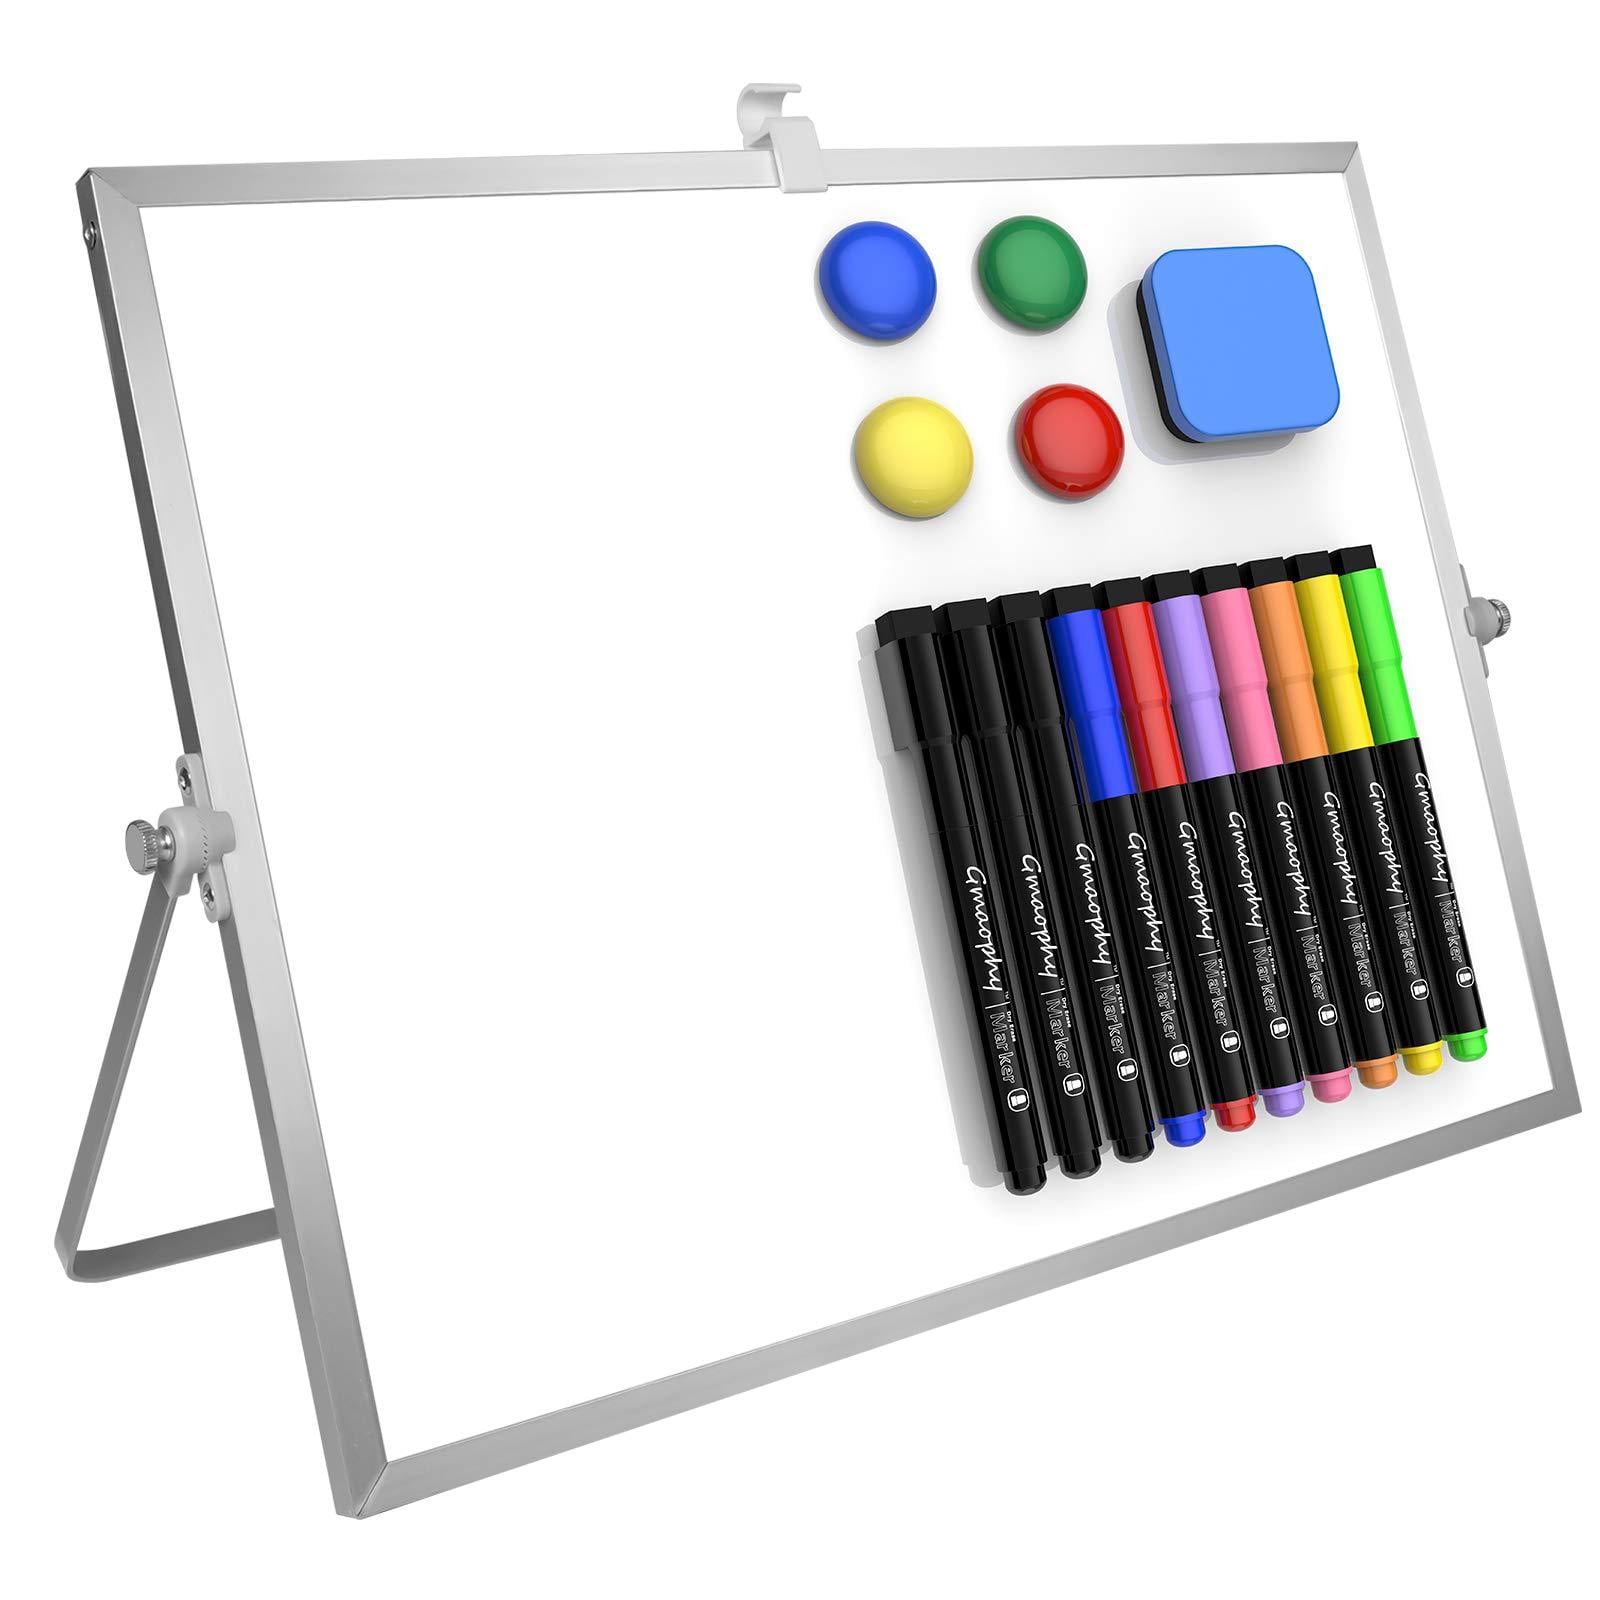 Black Small Dry Erase White Board Magnetic Desktop Foldable Whiteboard Portable Mini Easel Double Sided on Table Top with Holder for Kids Drawing Memo Board. Teacher Instruction 